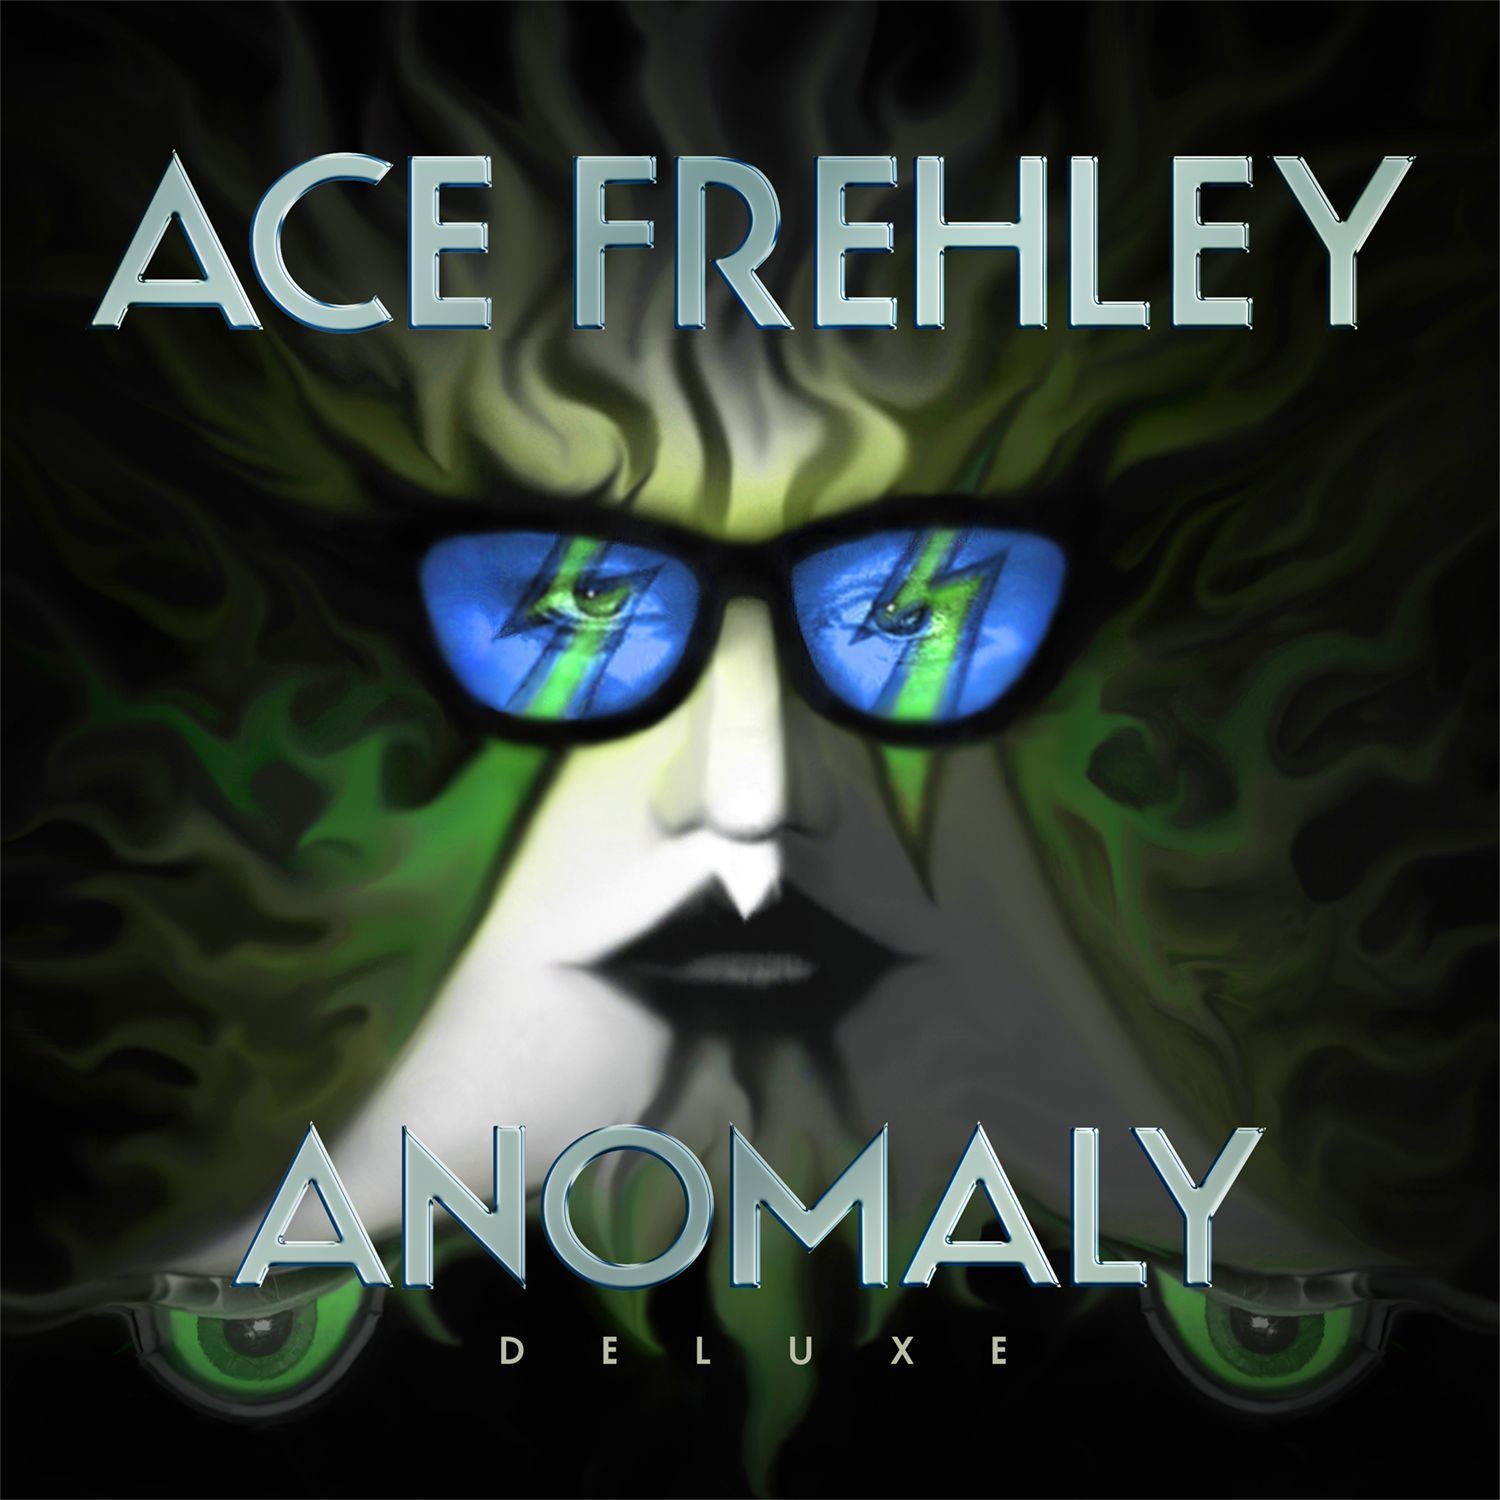 Ace_frehley_anomaly_rock and blog